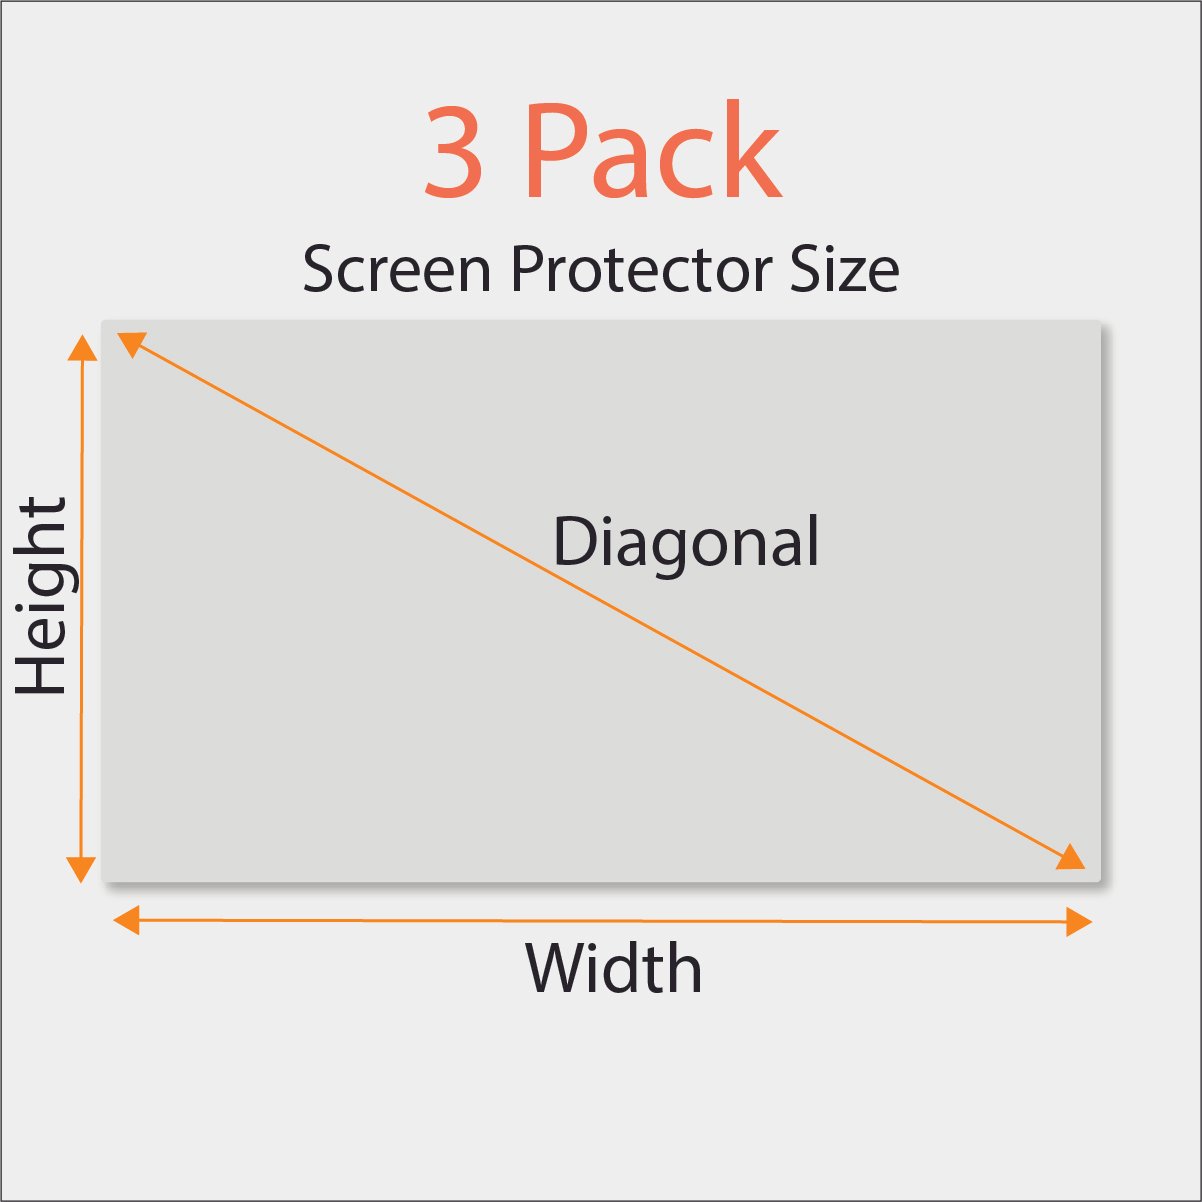 Anti Blue Light Screen Protector (3 Pack) for Desktop Monitor. Filter Out Blue Light and Relieve Computer Eye Strain to Help You Sleep Better